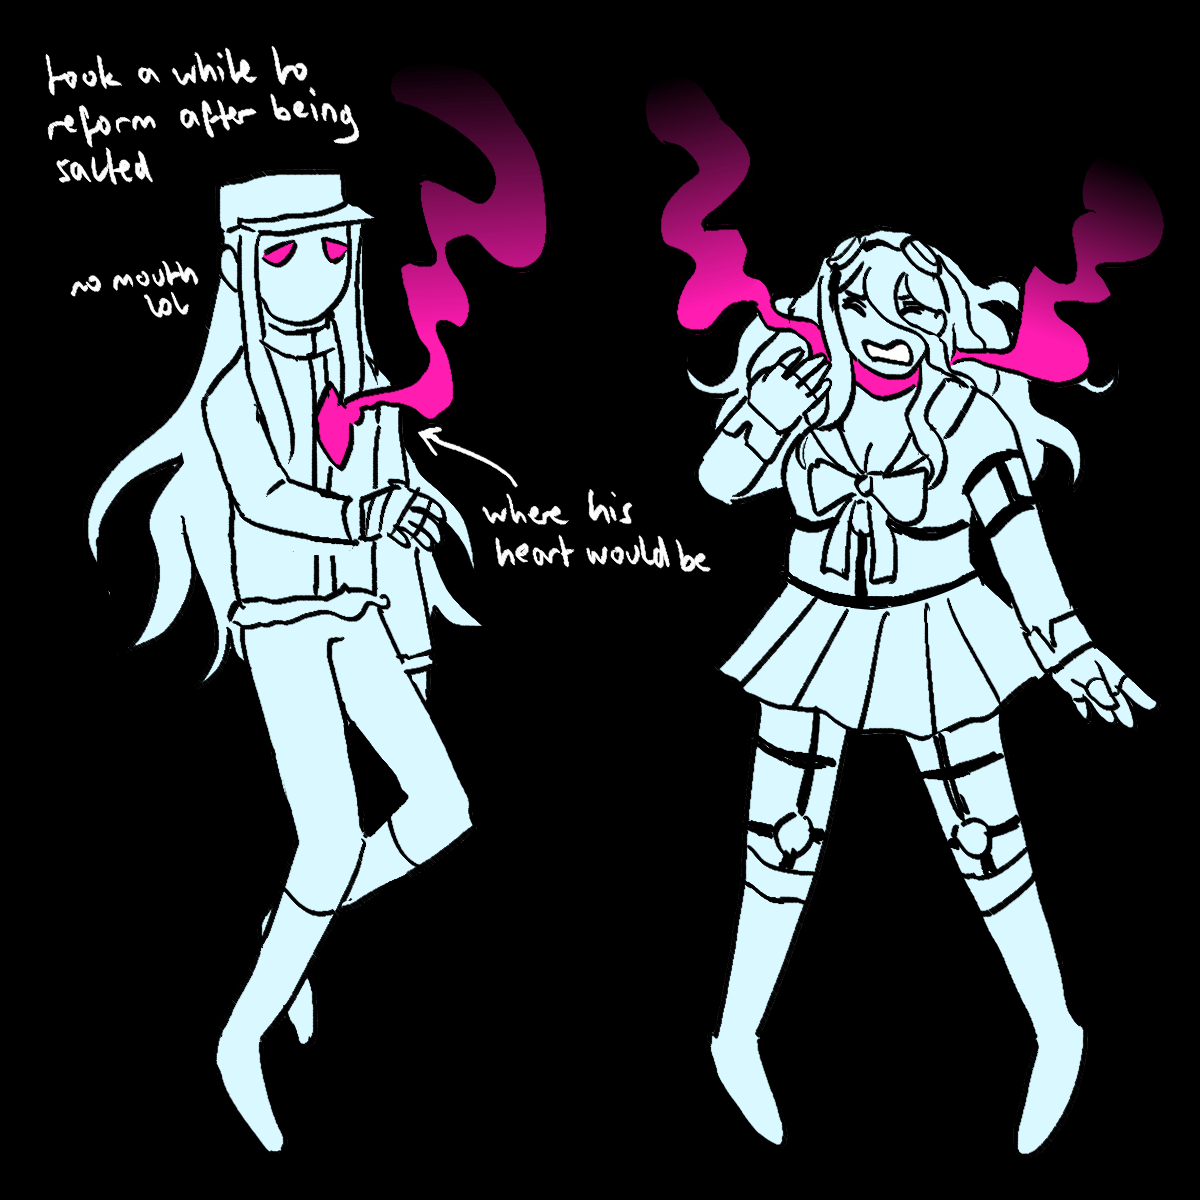 a drawing of korekiyo and miu as ghosts. korekiyo has text next to him saying 'took
		a while to reform after being salted' and 'no mouth lol'. an arrow pointing at his wisp says 'where his heart would be'.